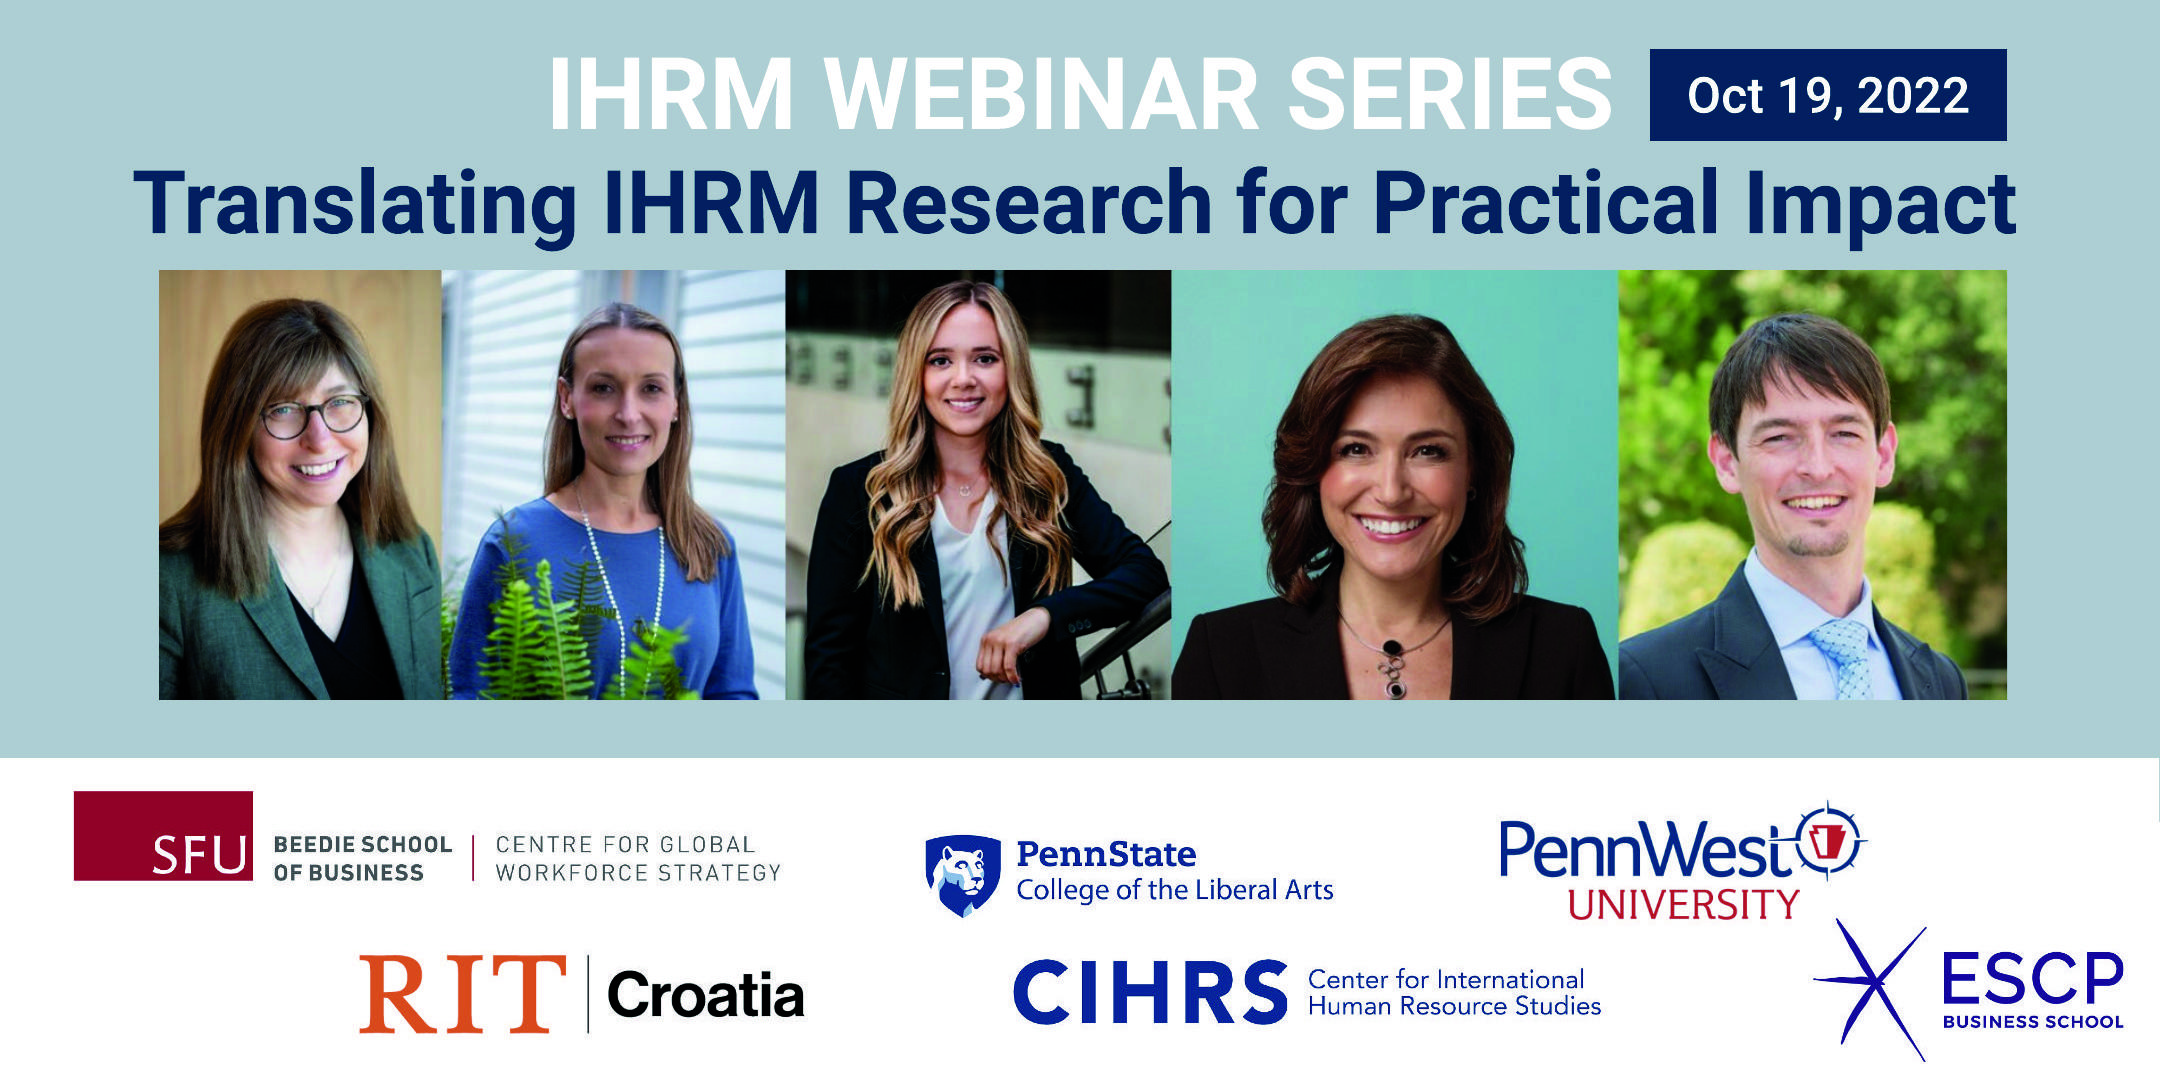 Translating IHRM Research for Practical Impact